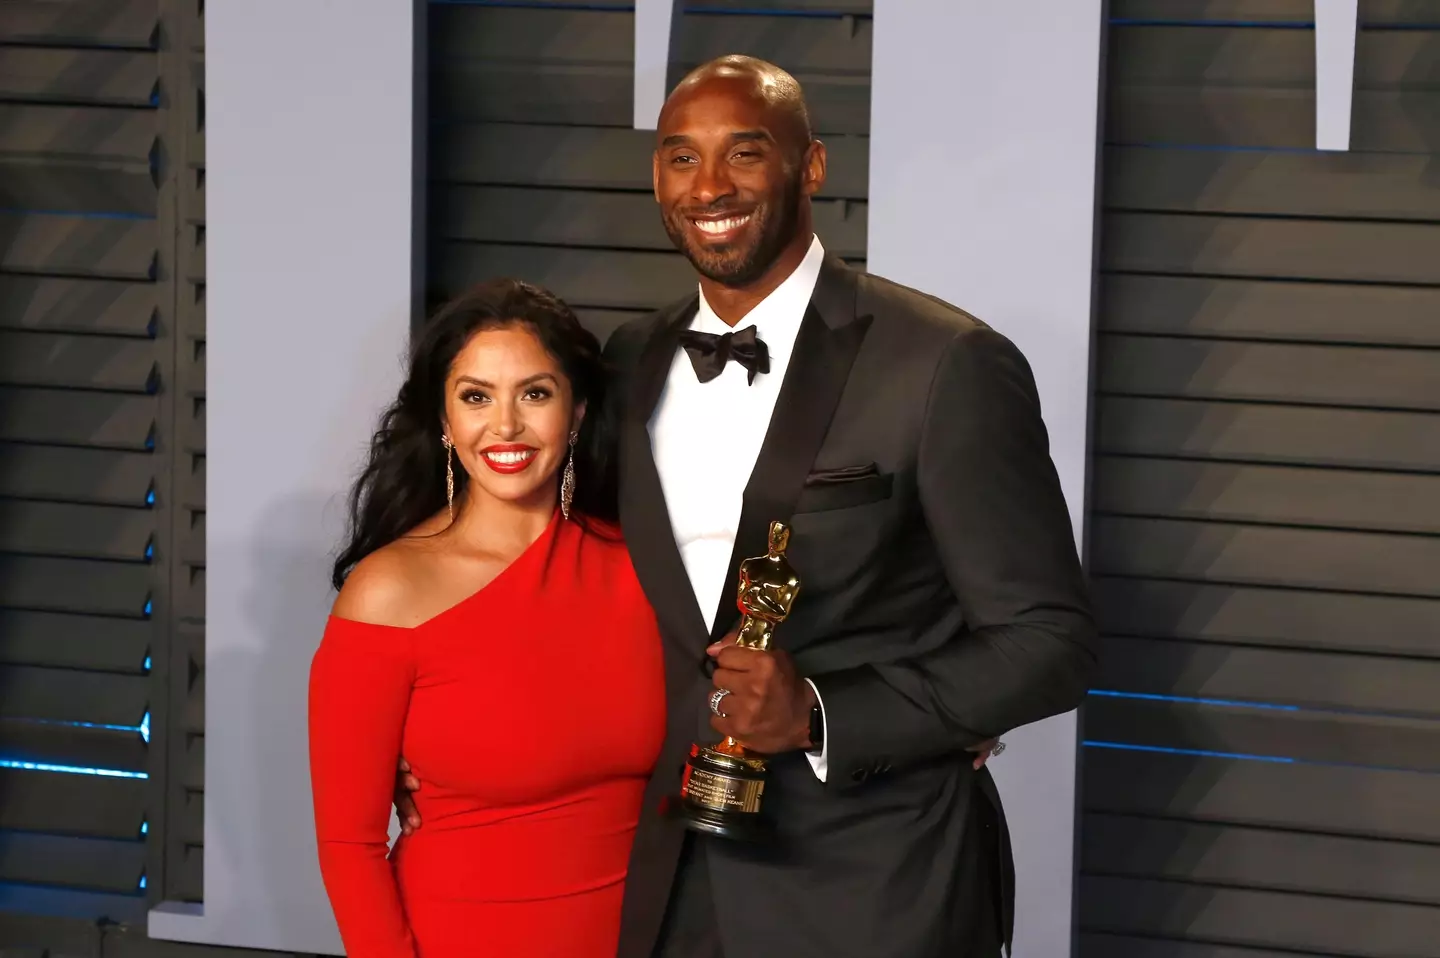 Vanessa Bryant said she ‘lives in fear’ that graphic photos of her husband Kobe and daughter’s remains will ‘pop up’ on social media.